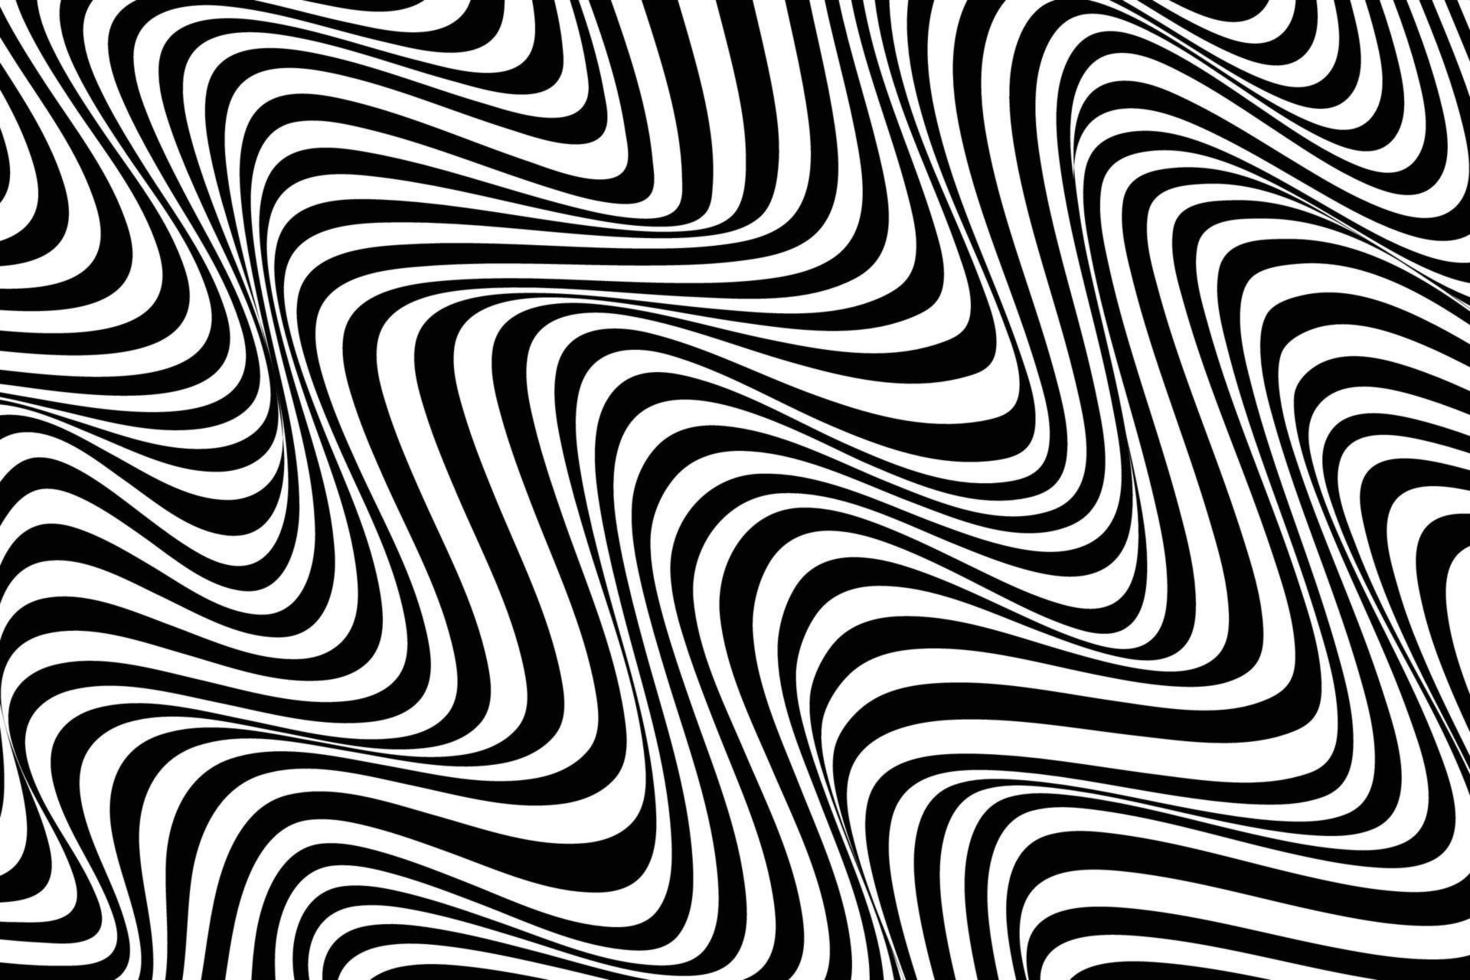 Optical illusion art. Abstract wavy stripe flow background. Black and white lines pattern design vector